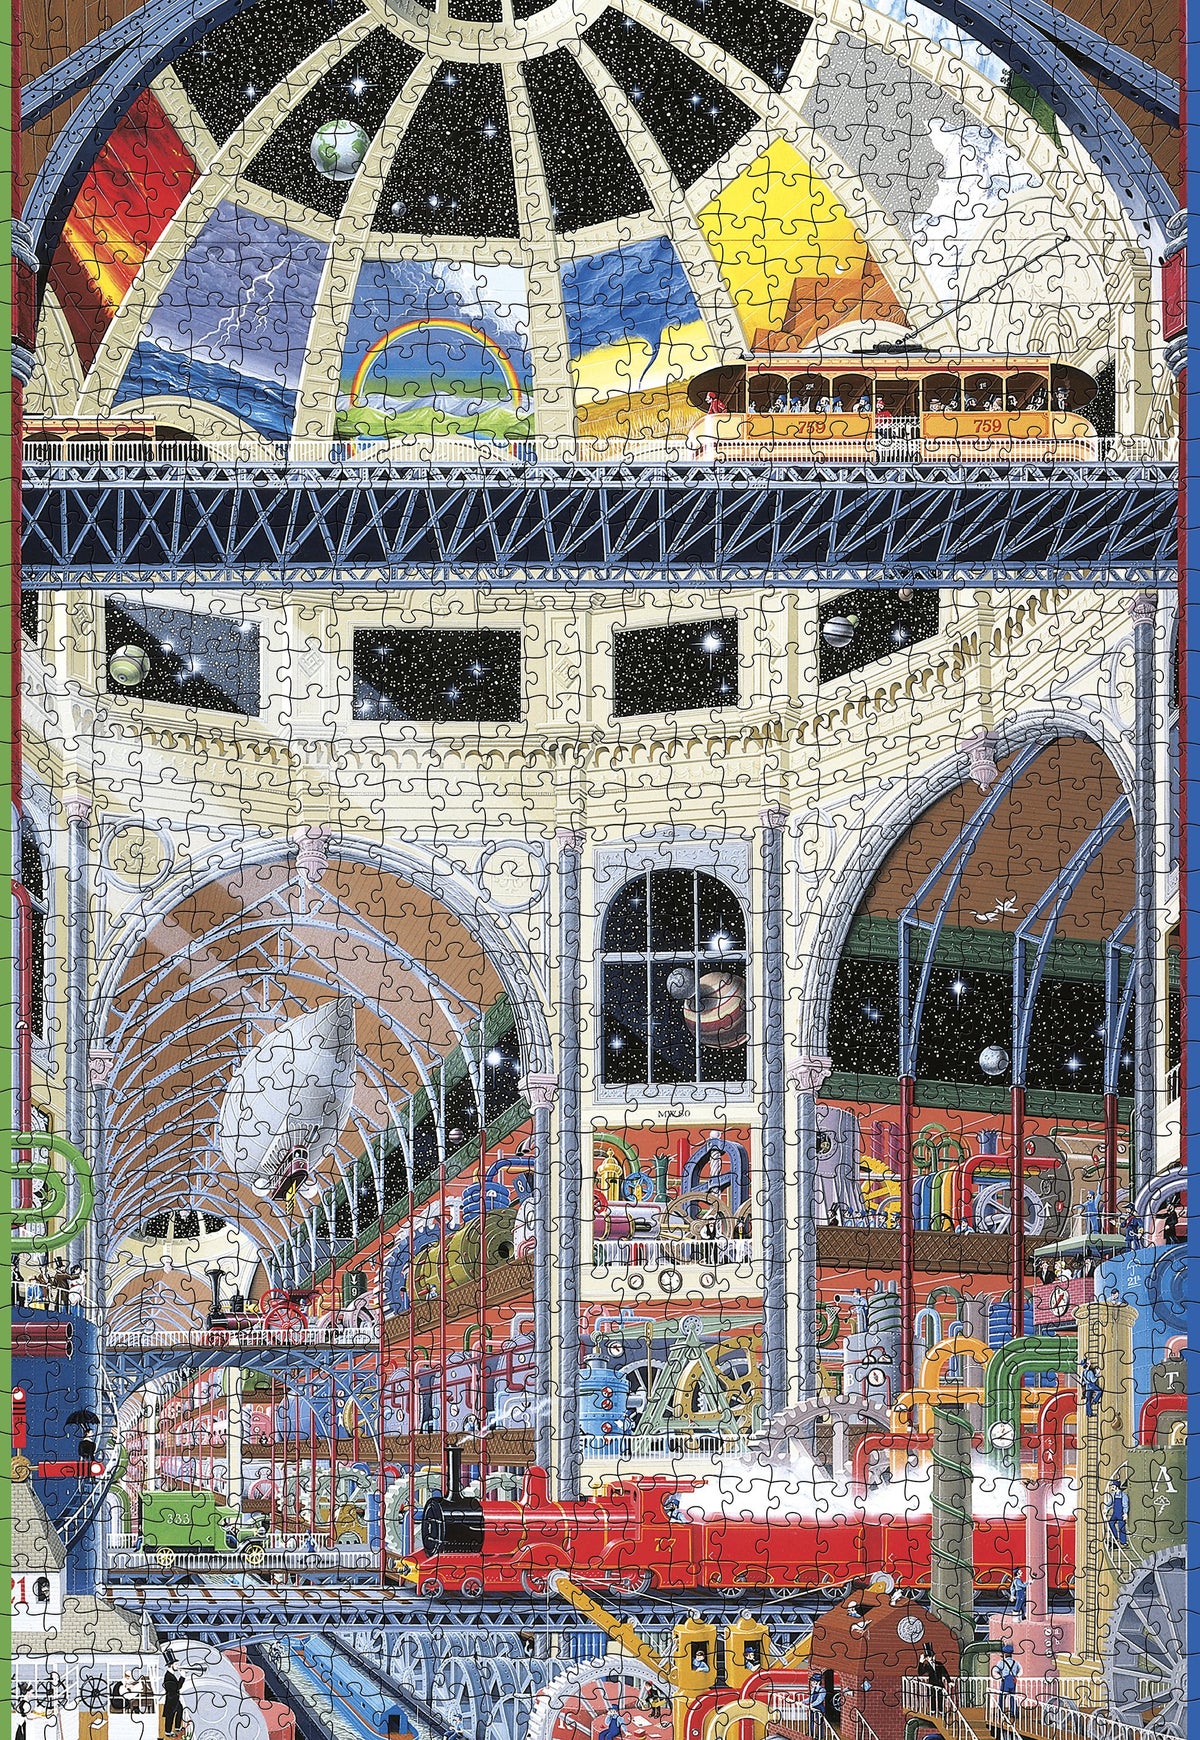 Mike Wilks: The Weather Works: The Grand Hall 1000 Piece Jigsaw Puzzle - Quick Ship